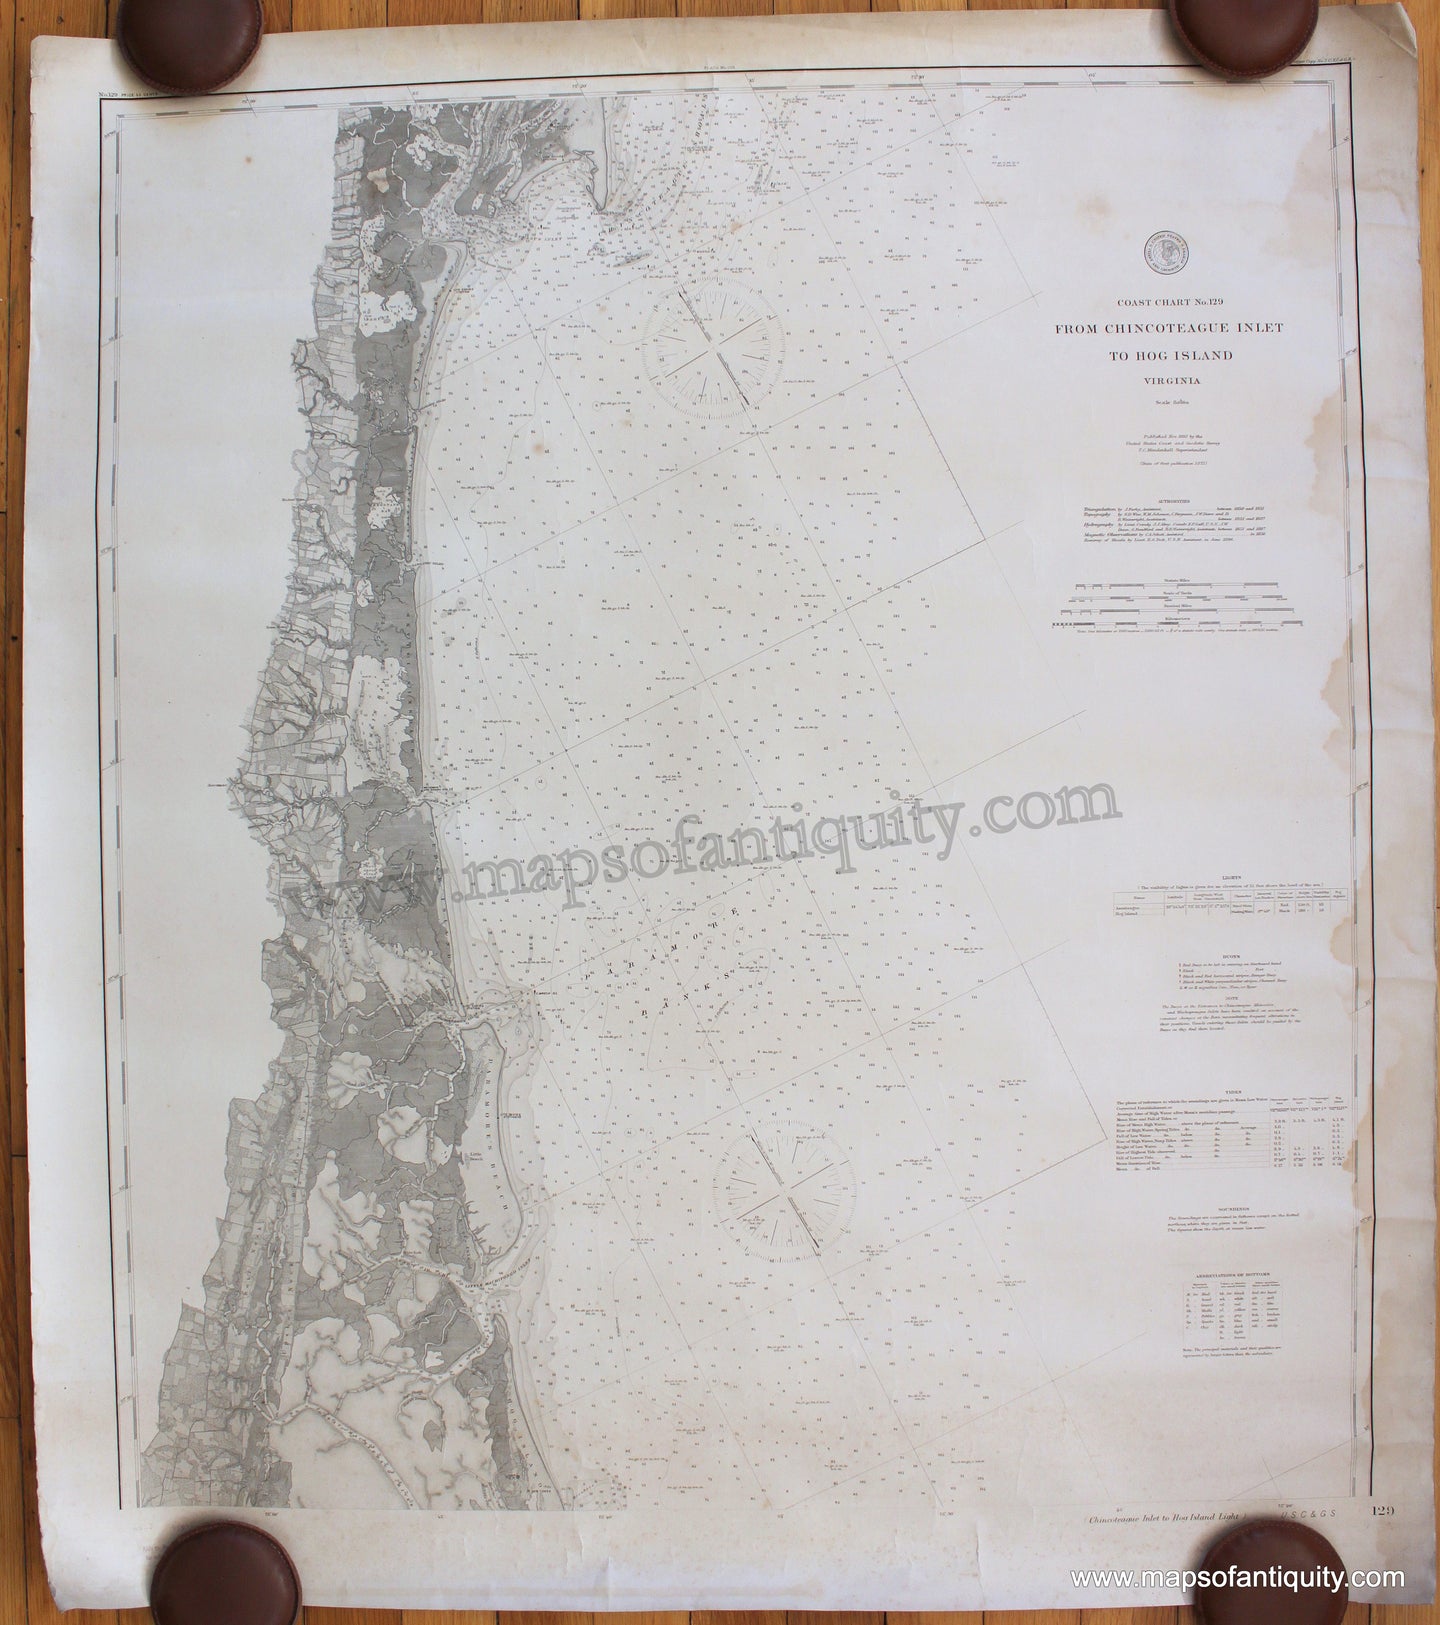 Antique-Black-and-White-Nautical-Chart-From-Chincoteague-Inlet-to-Hog-Island-Virginia-1875-1892-US-Coast-and-Geodetic-Survey-US-Mid-Atlantic-Charts-1800s-19th-century-Maps-of-Antiquity